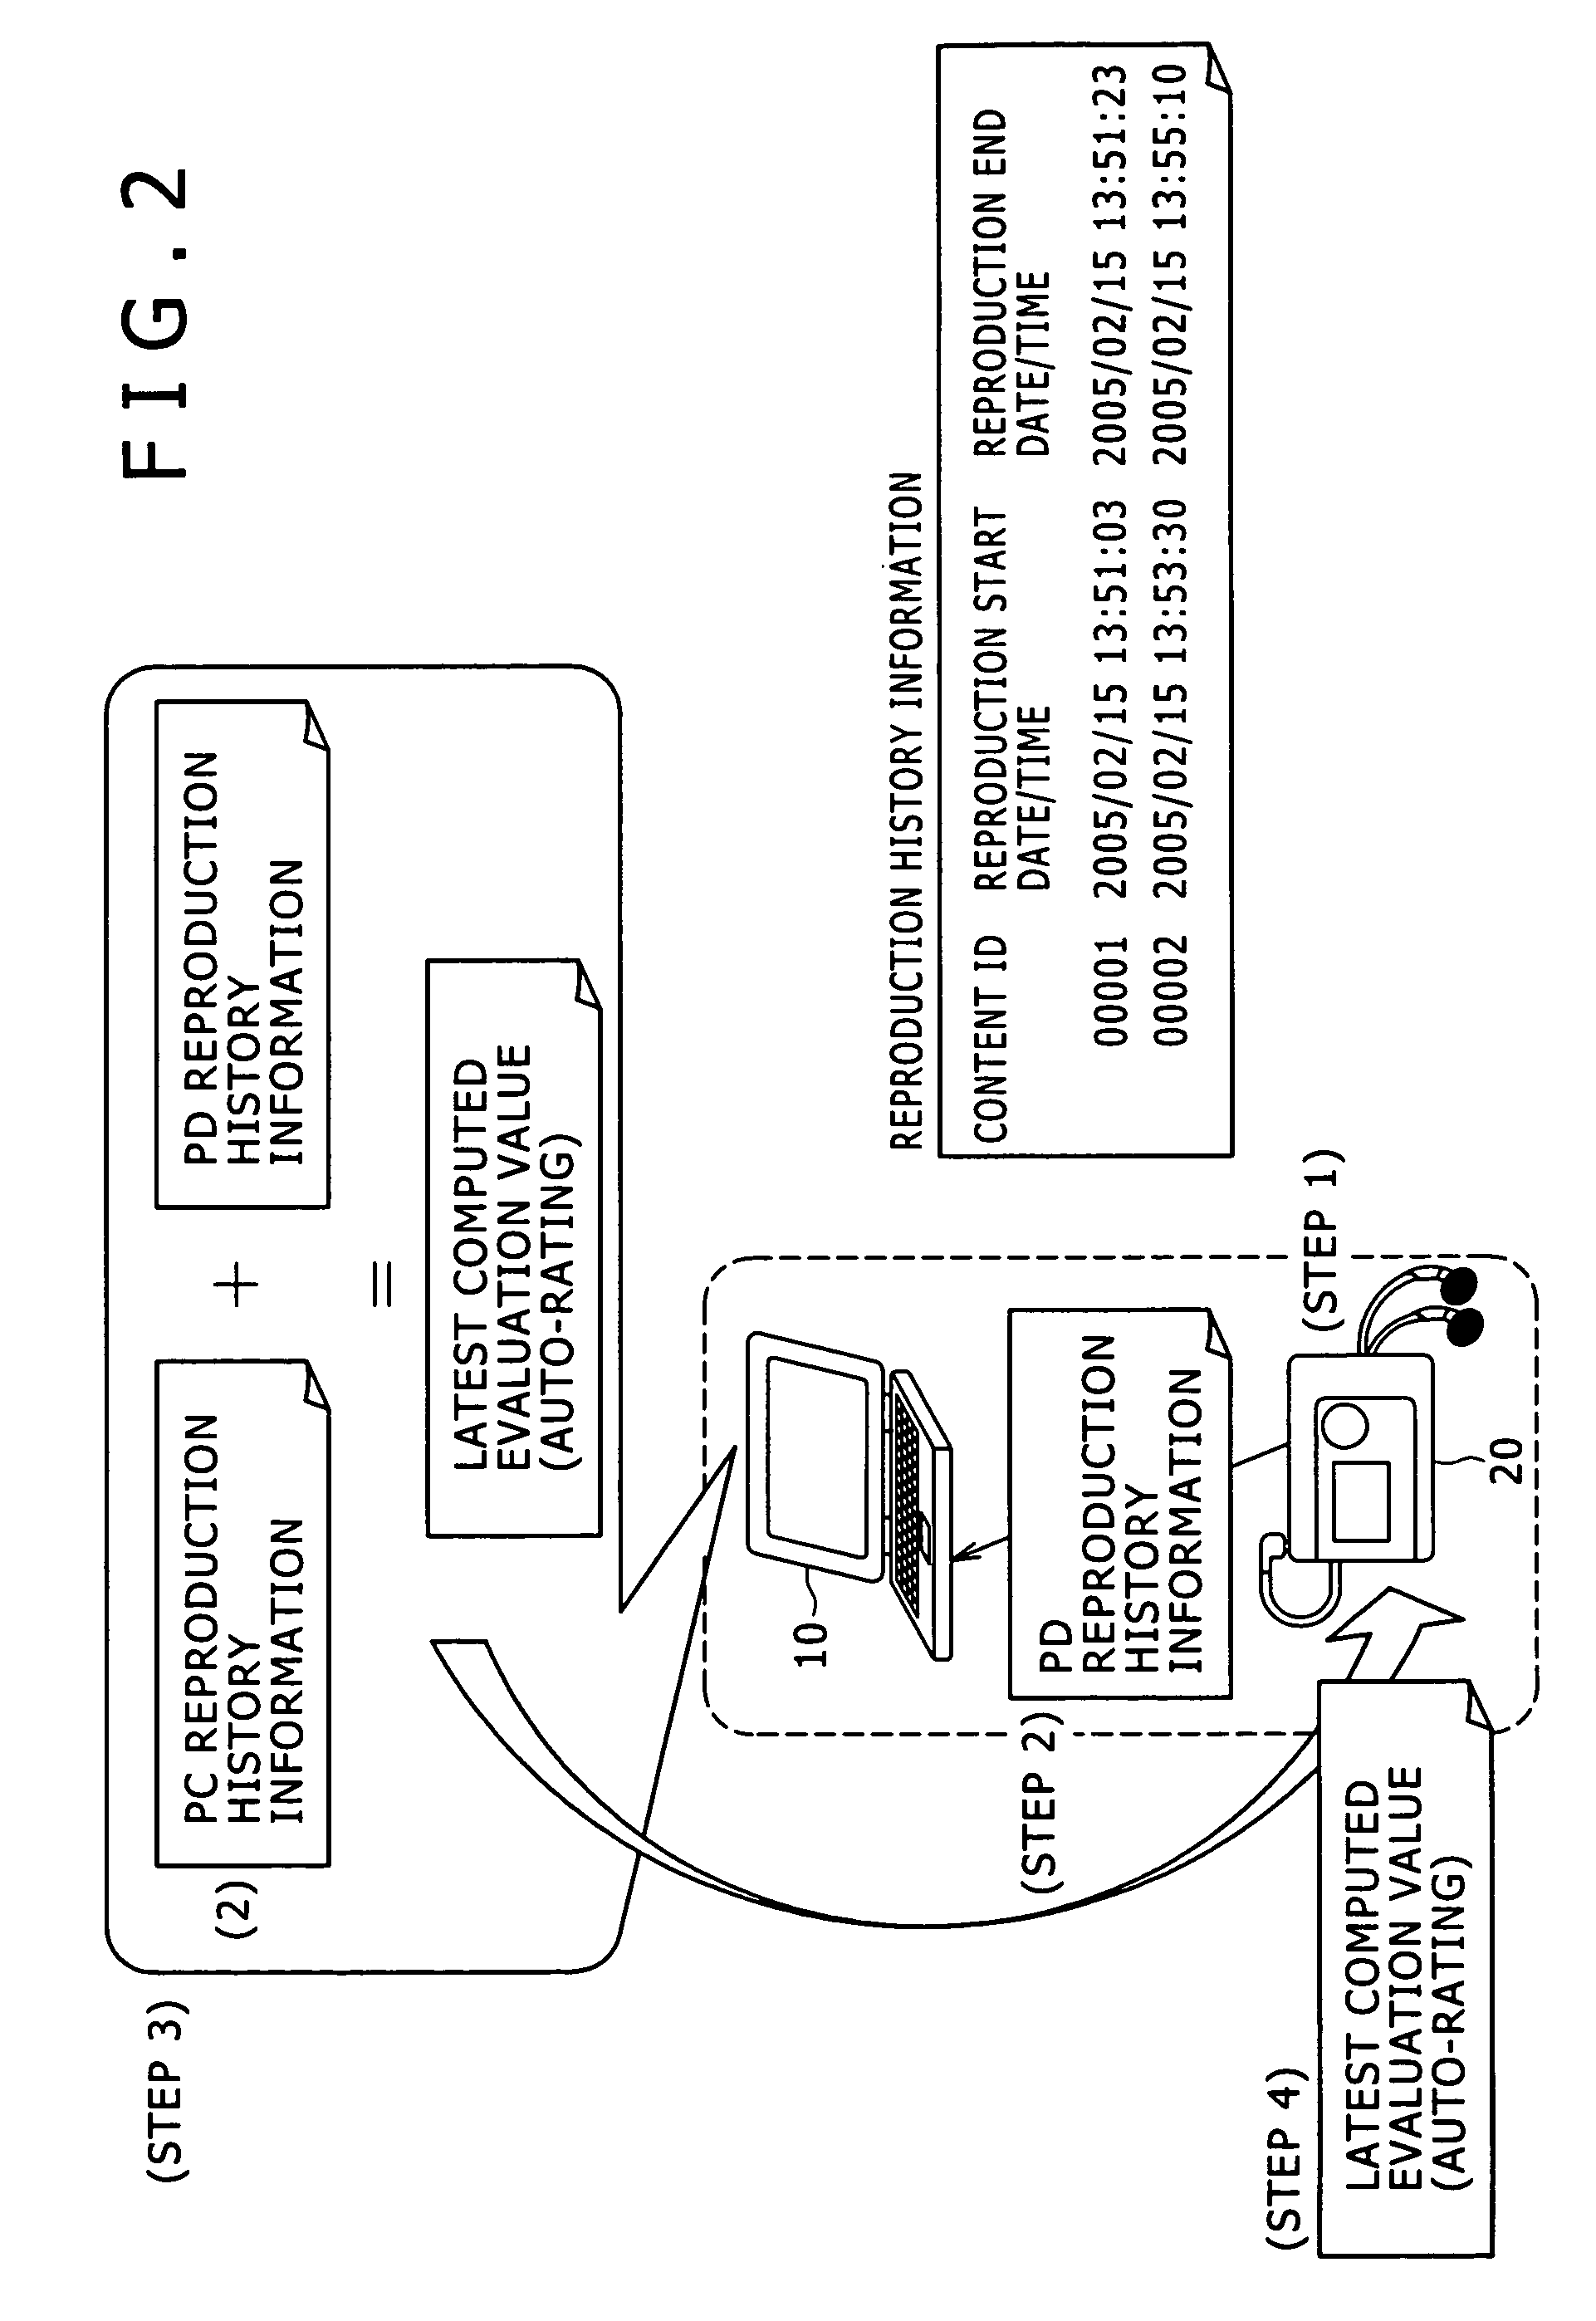 Apparatus and method for computing evaluation values of content data stored for reproduction